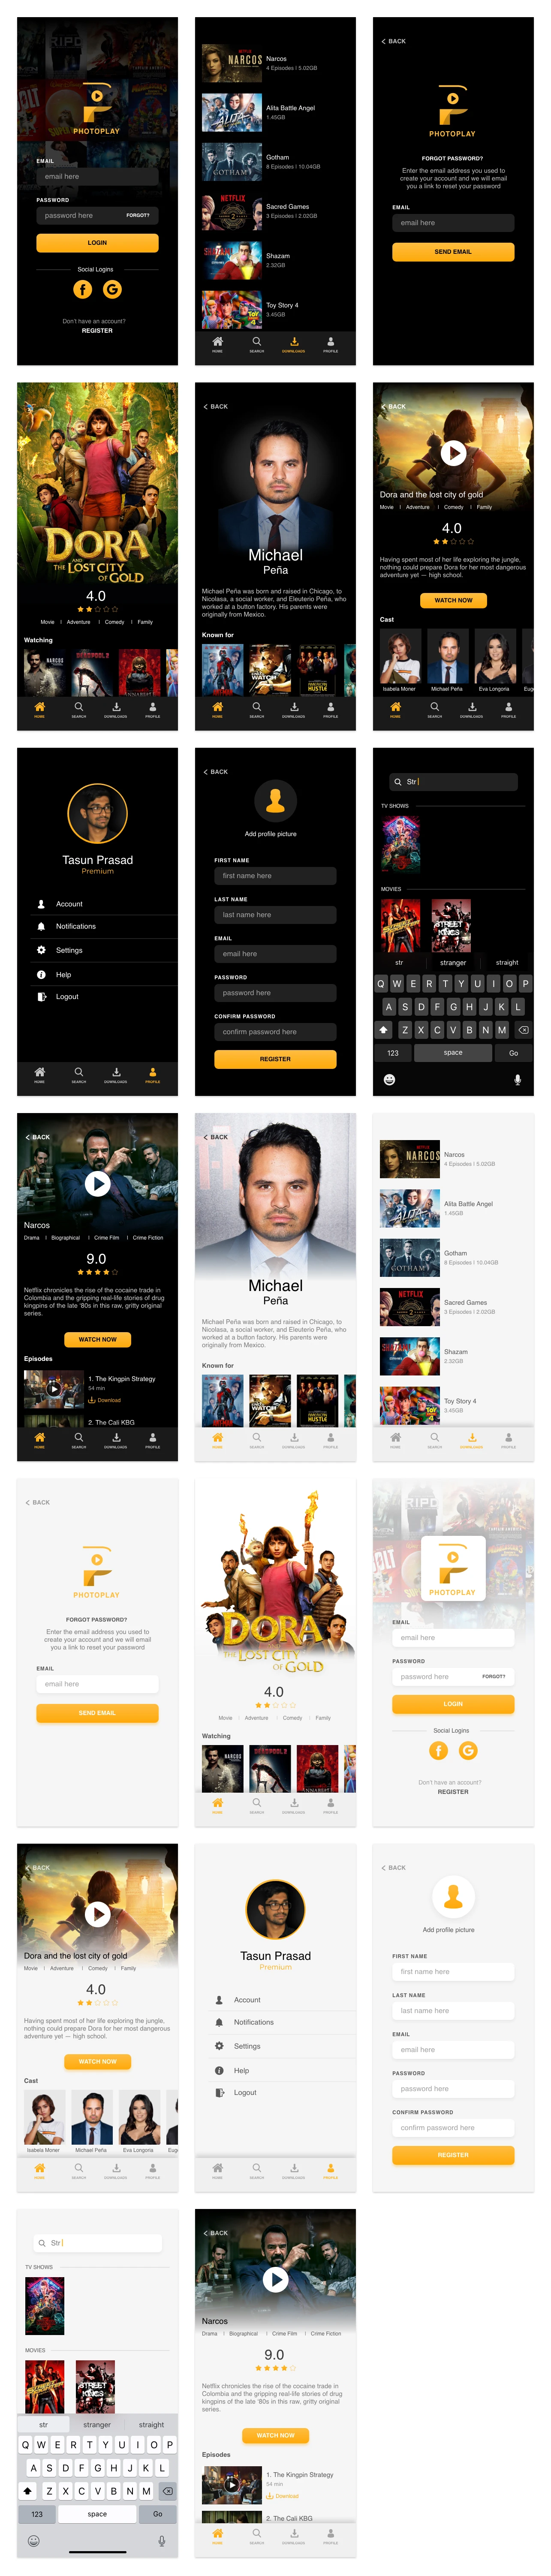 Photoplay Free UI Kit for Adobe XD - A movie and TV Show streaming mobile UI Kit. Minimal and clean app design, 20 screens for you to get started.